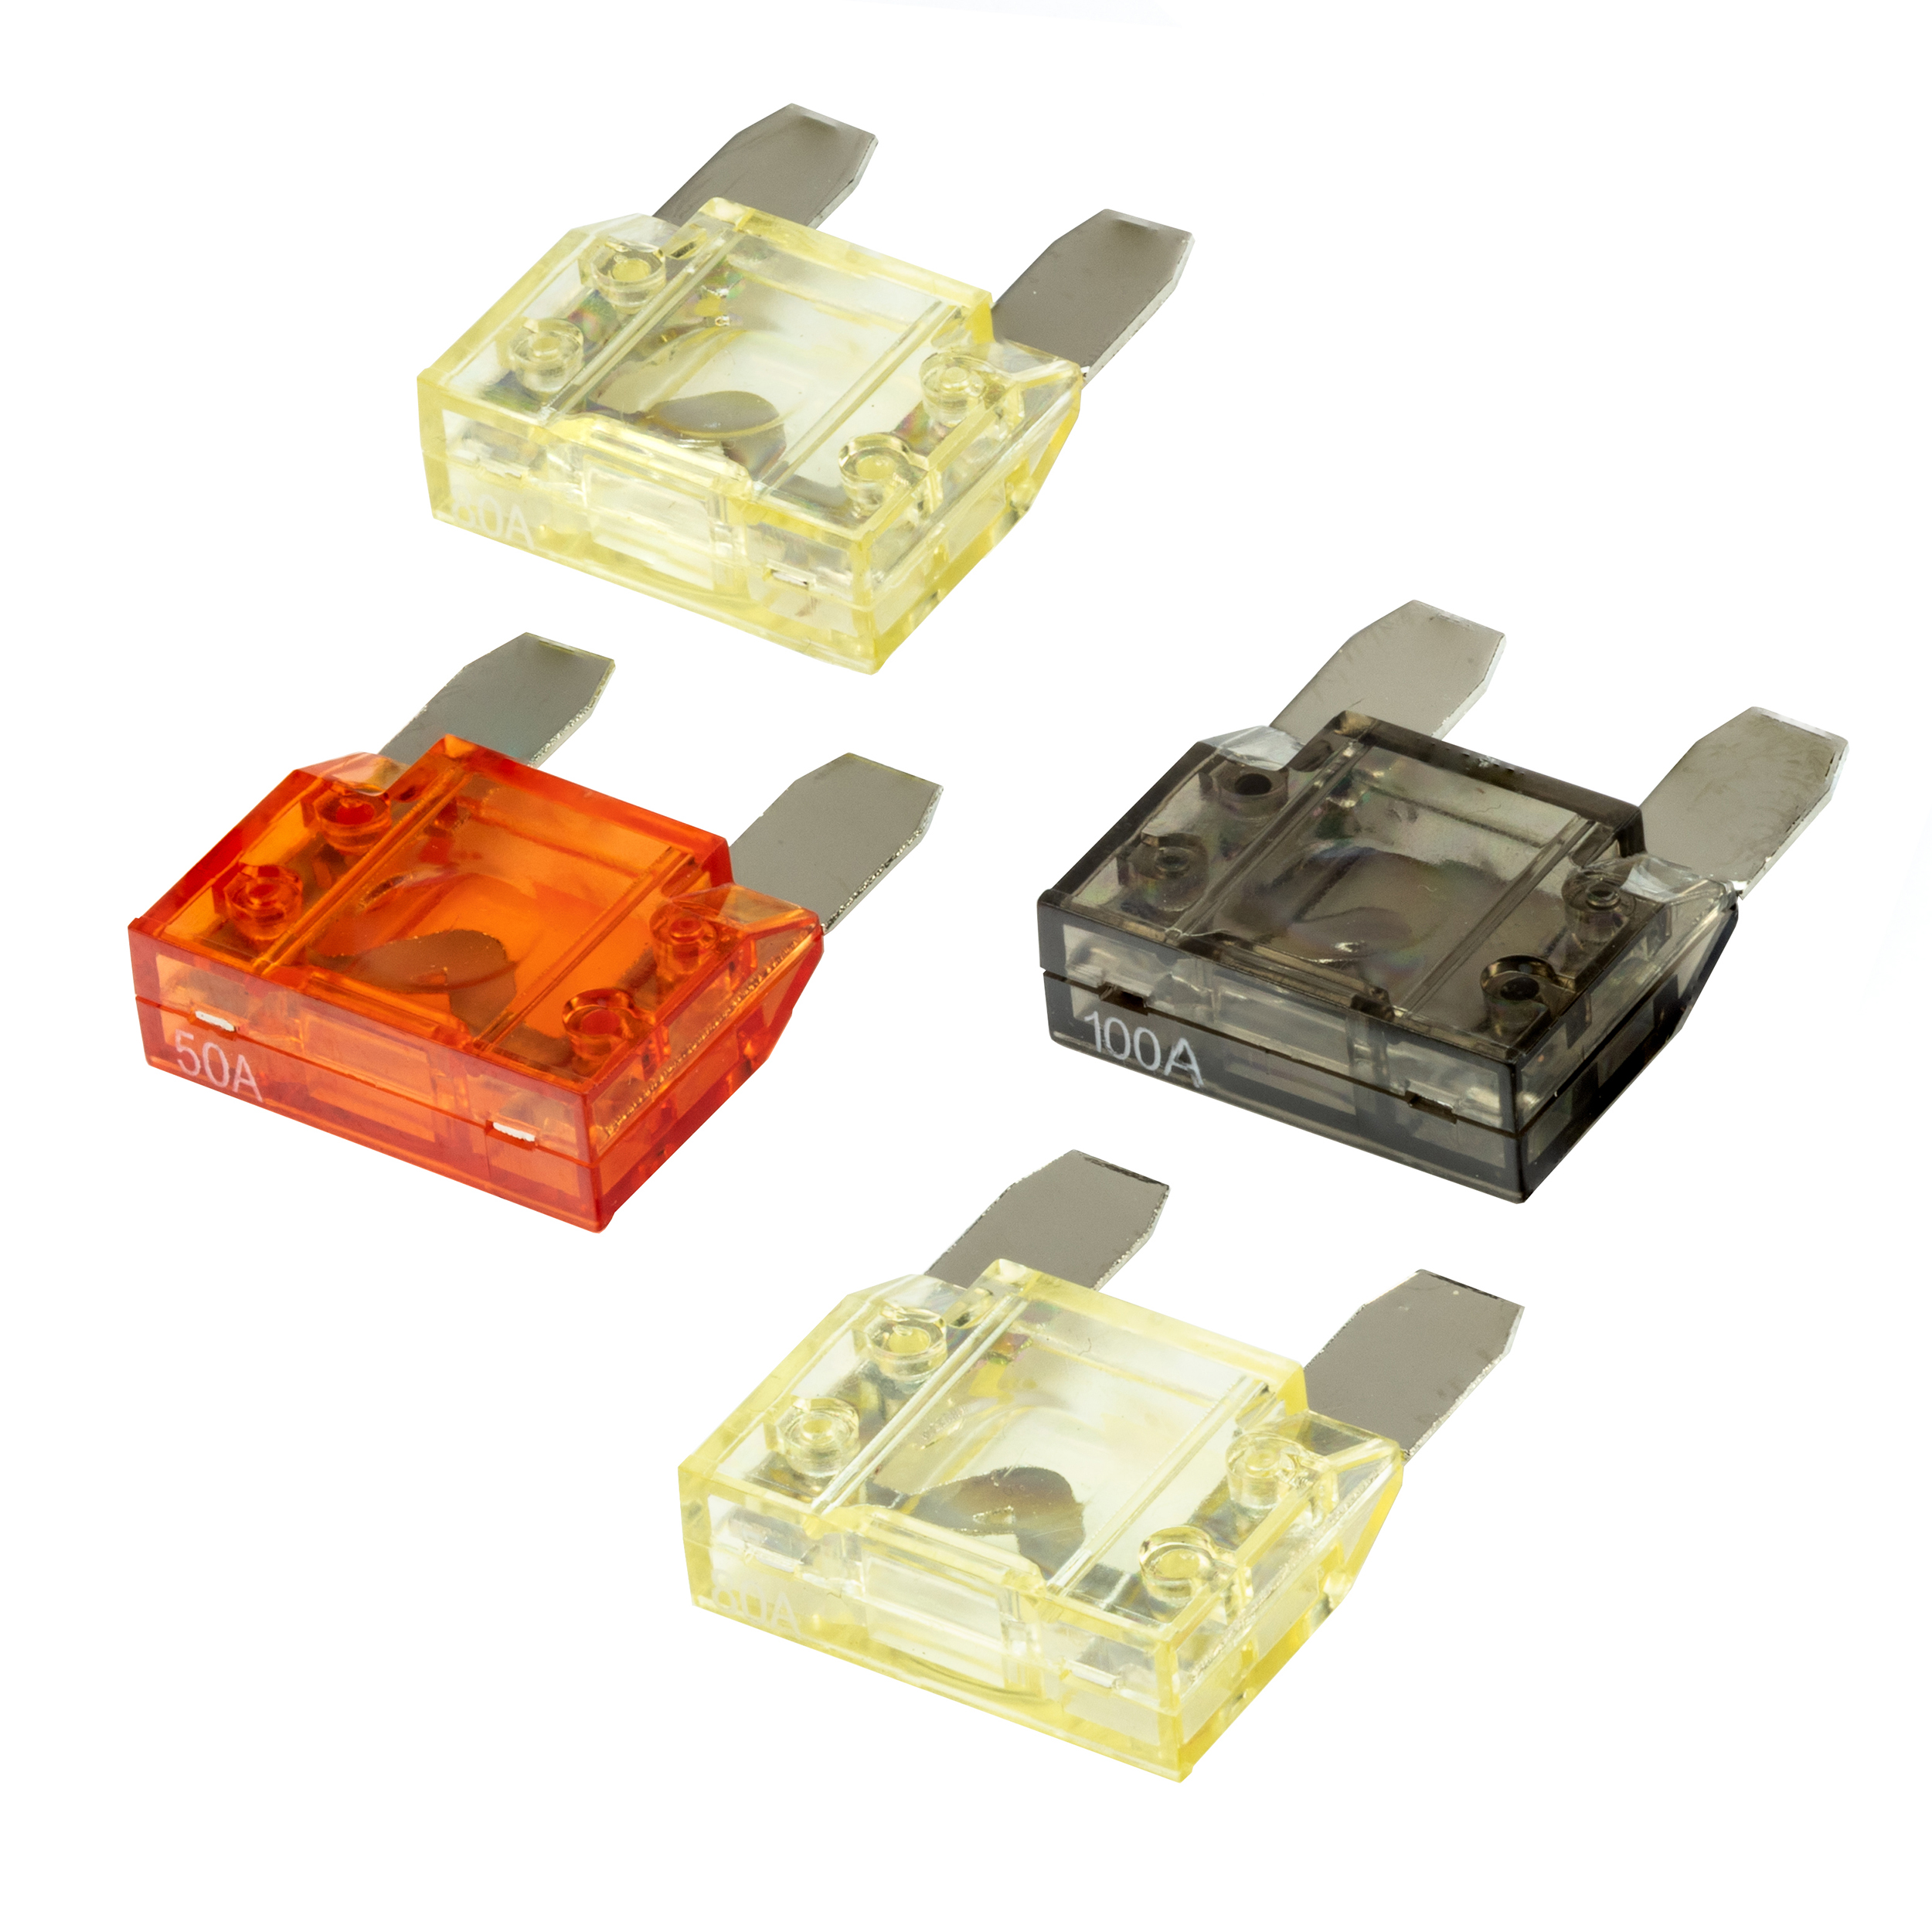 Scosche PMXK4-WP1 Maxi Fuses Use 12 v  W/ Wiring Kits/Fuse Holders/Distribution Blocks Multi Color - image 1 of 8